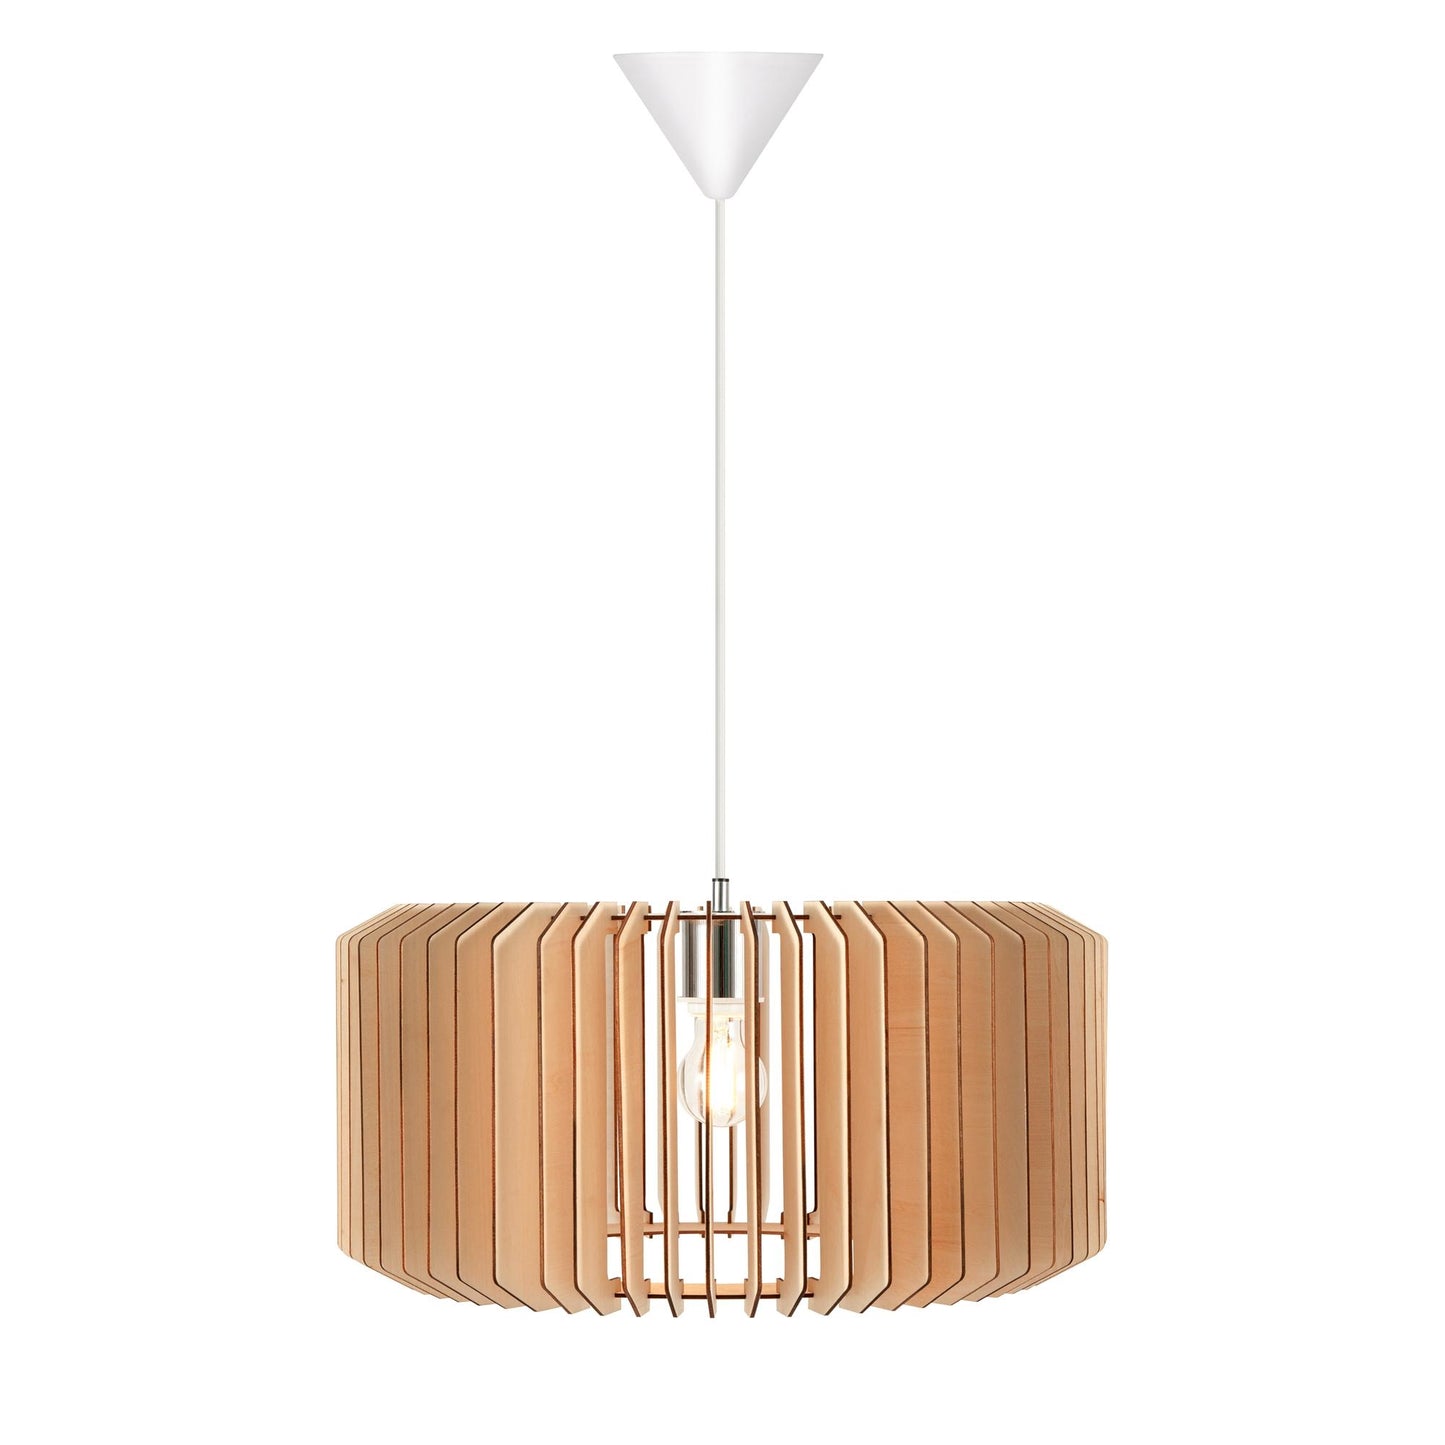 Asti 50 Pendant Lamp by nordlux #Natural